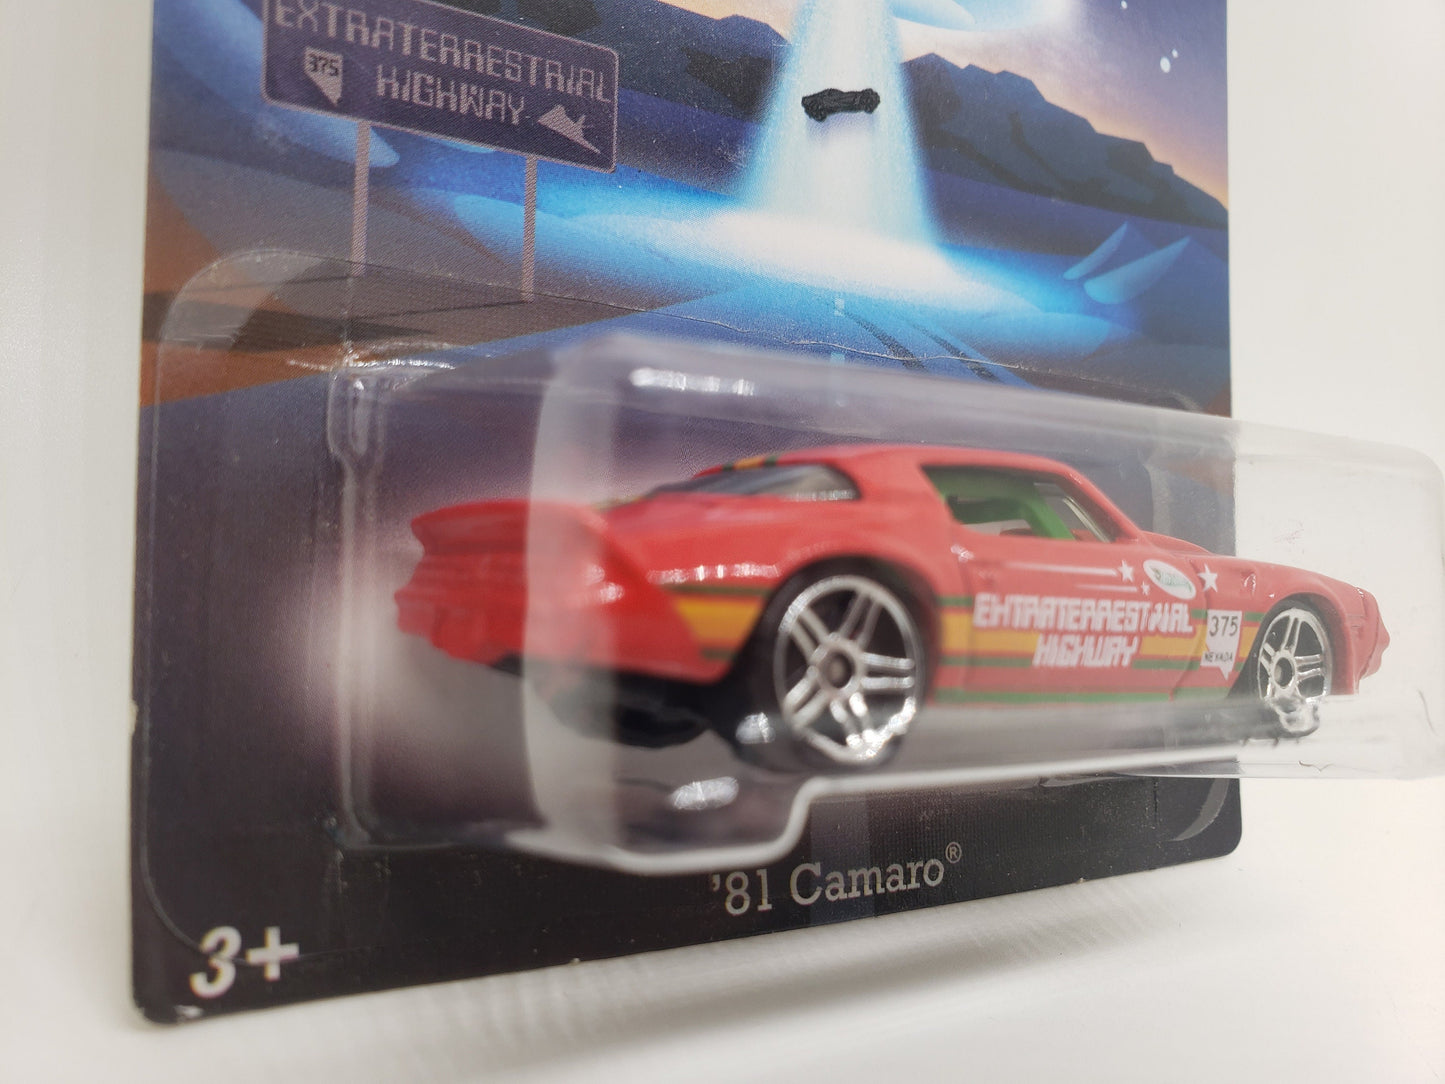 Hot Wheels '81 Camaro Red HW Road Trippin Perfect Birthday Gift Miniature Collectable Scale Model Toy Car